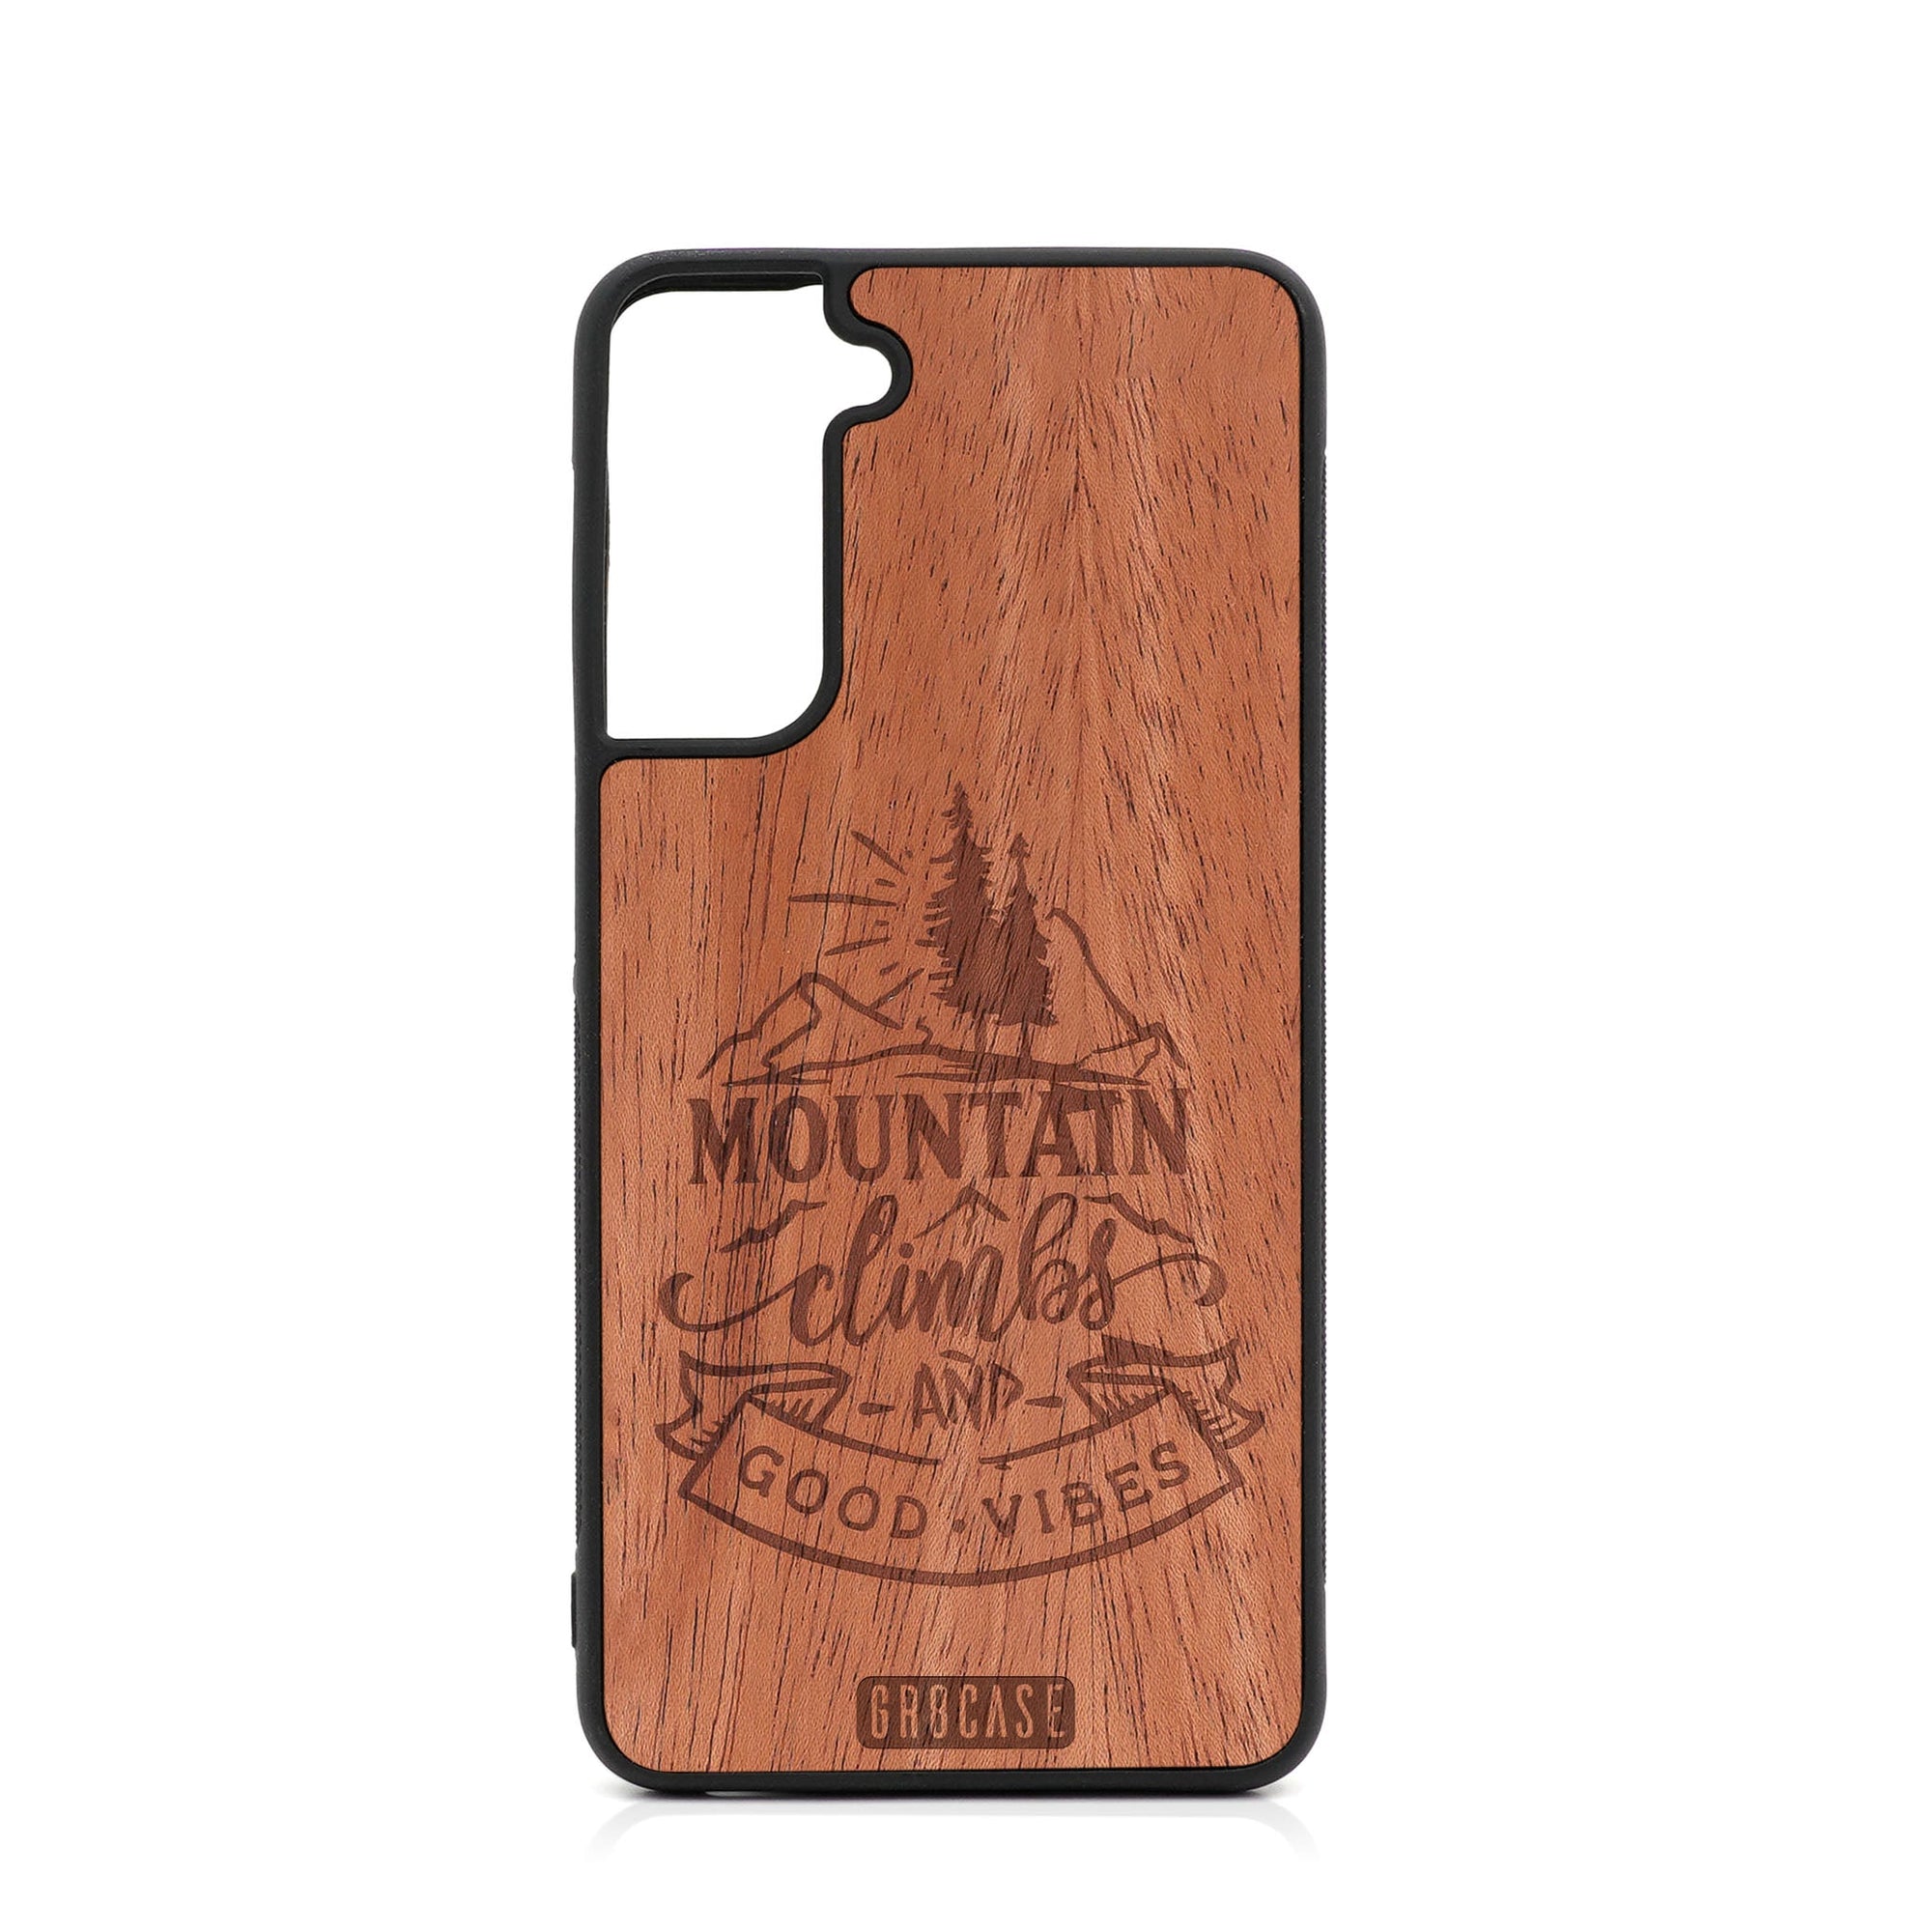 Mountain Climbs And Good Vibes Design Wood Case For Samsung Galaxy S22